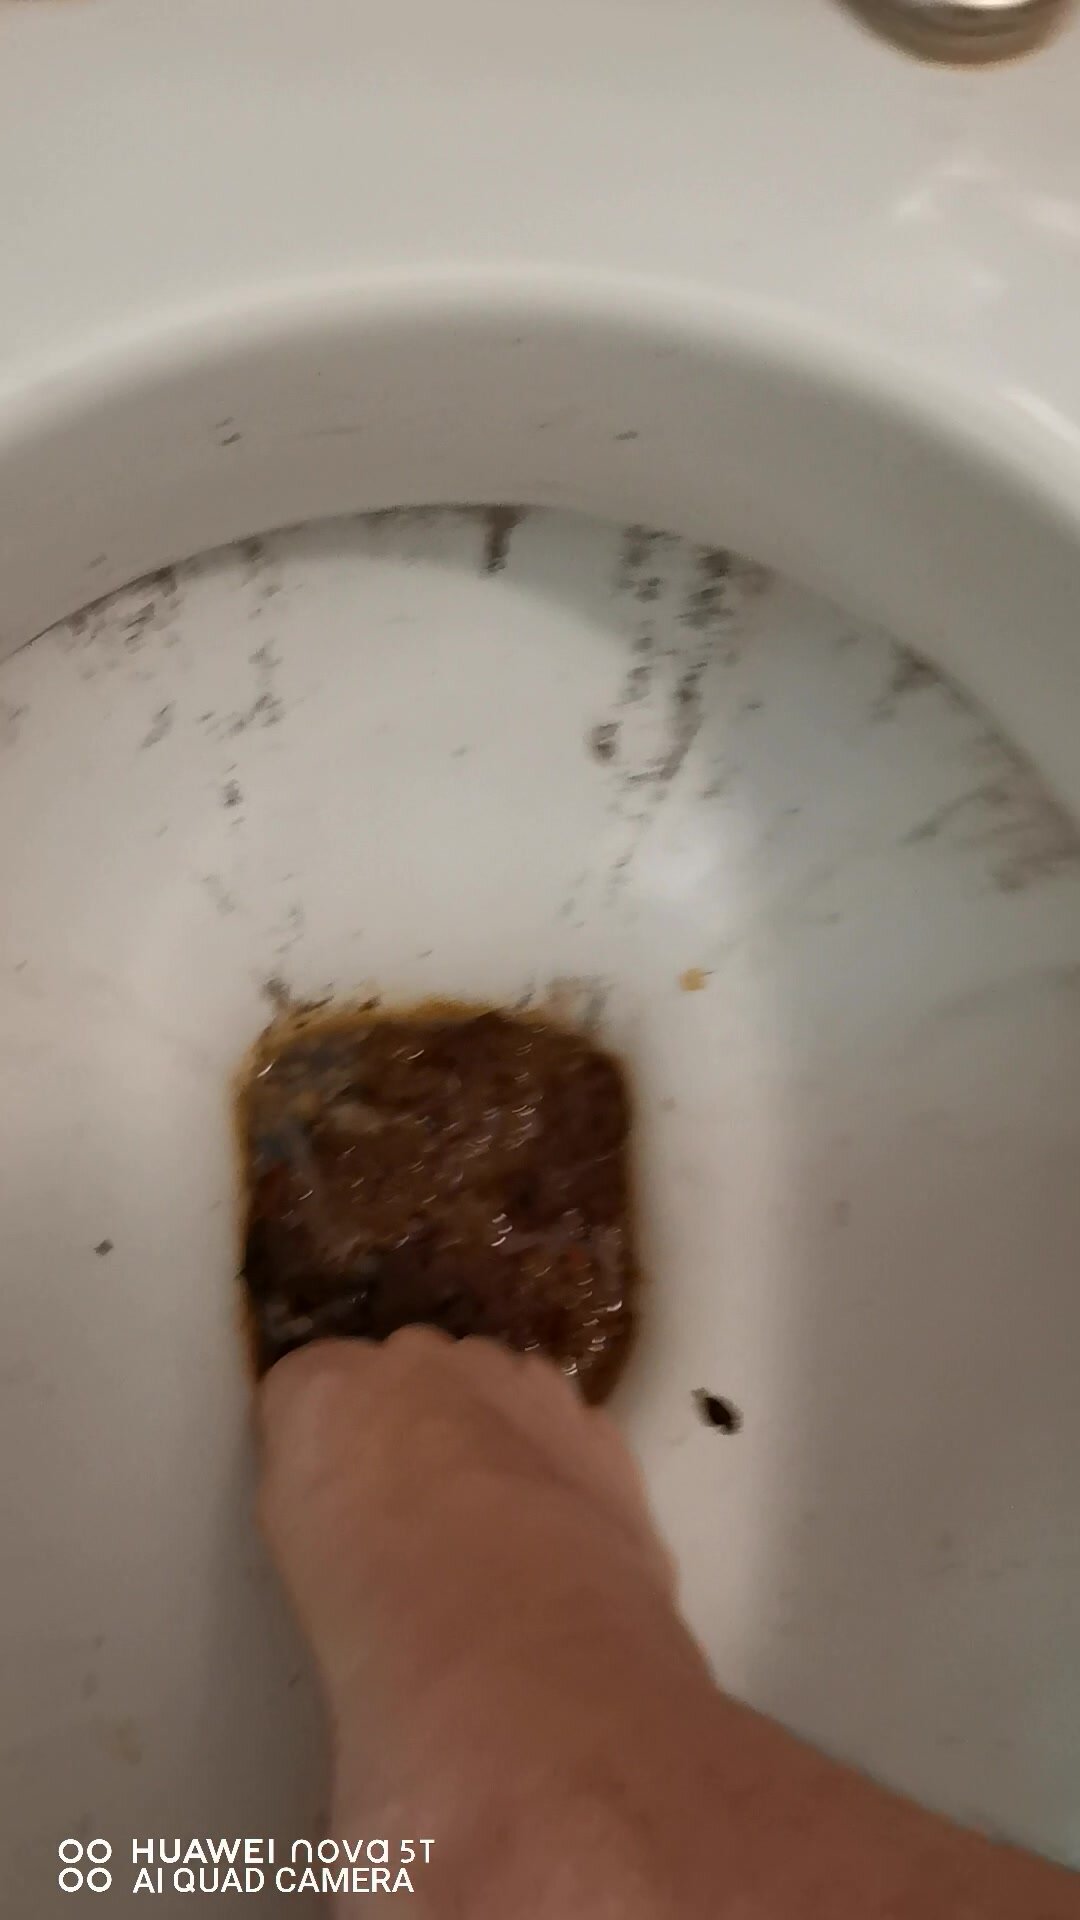 dirtying well the toilet with foot